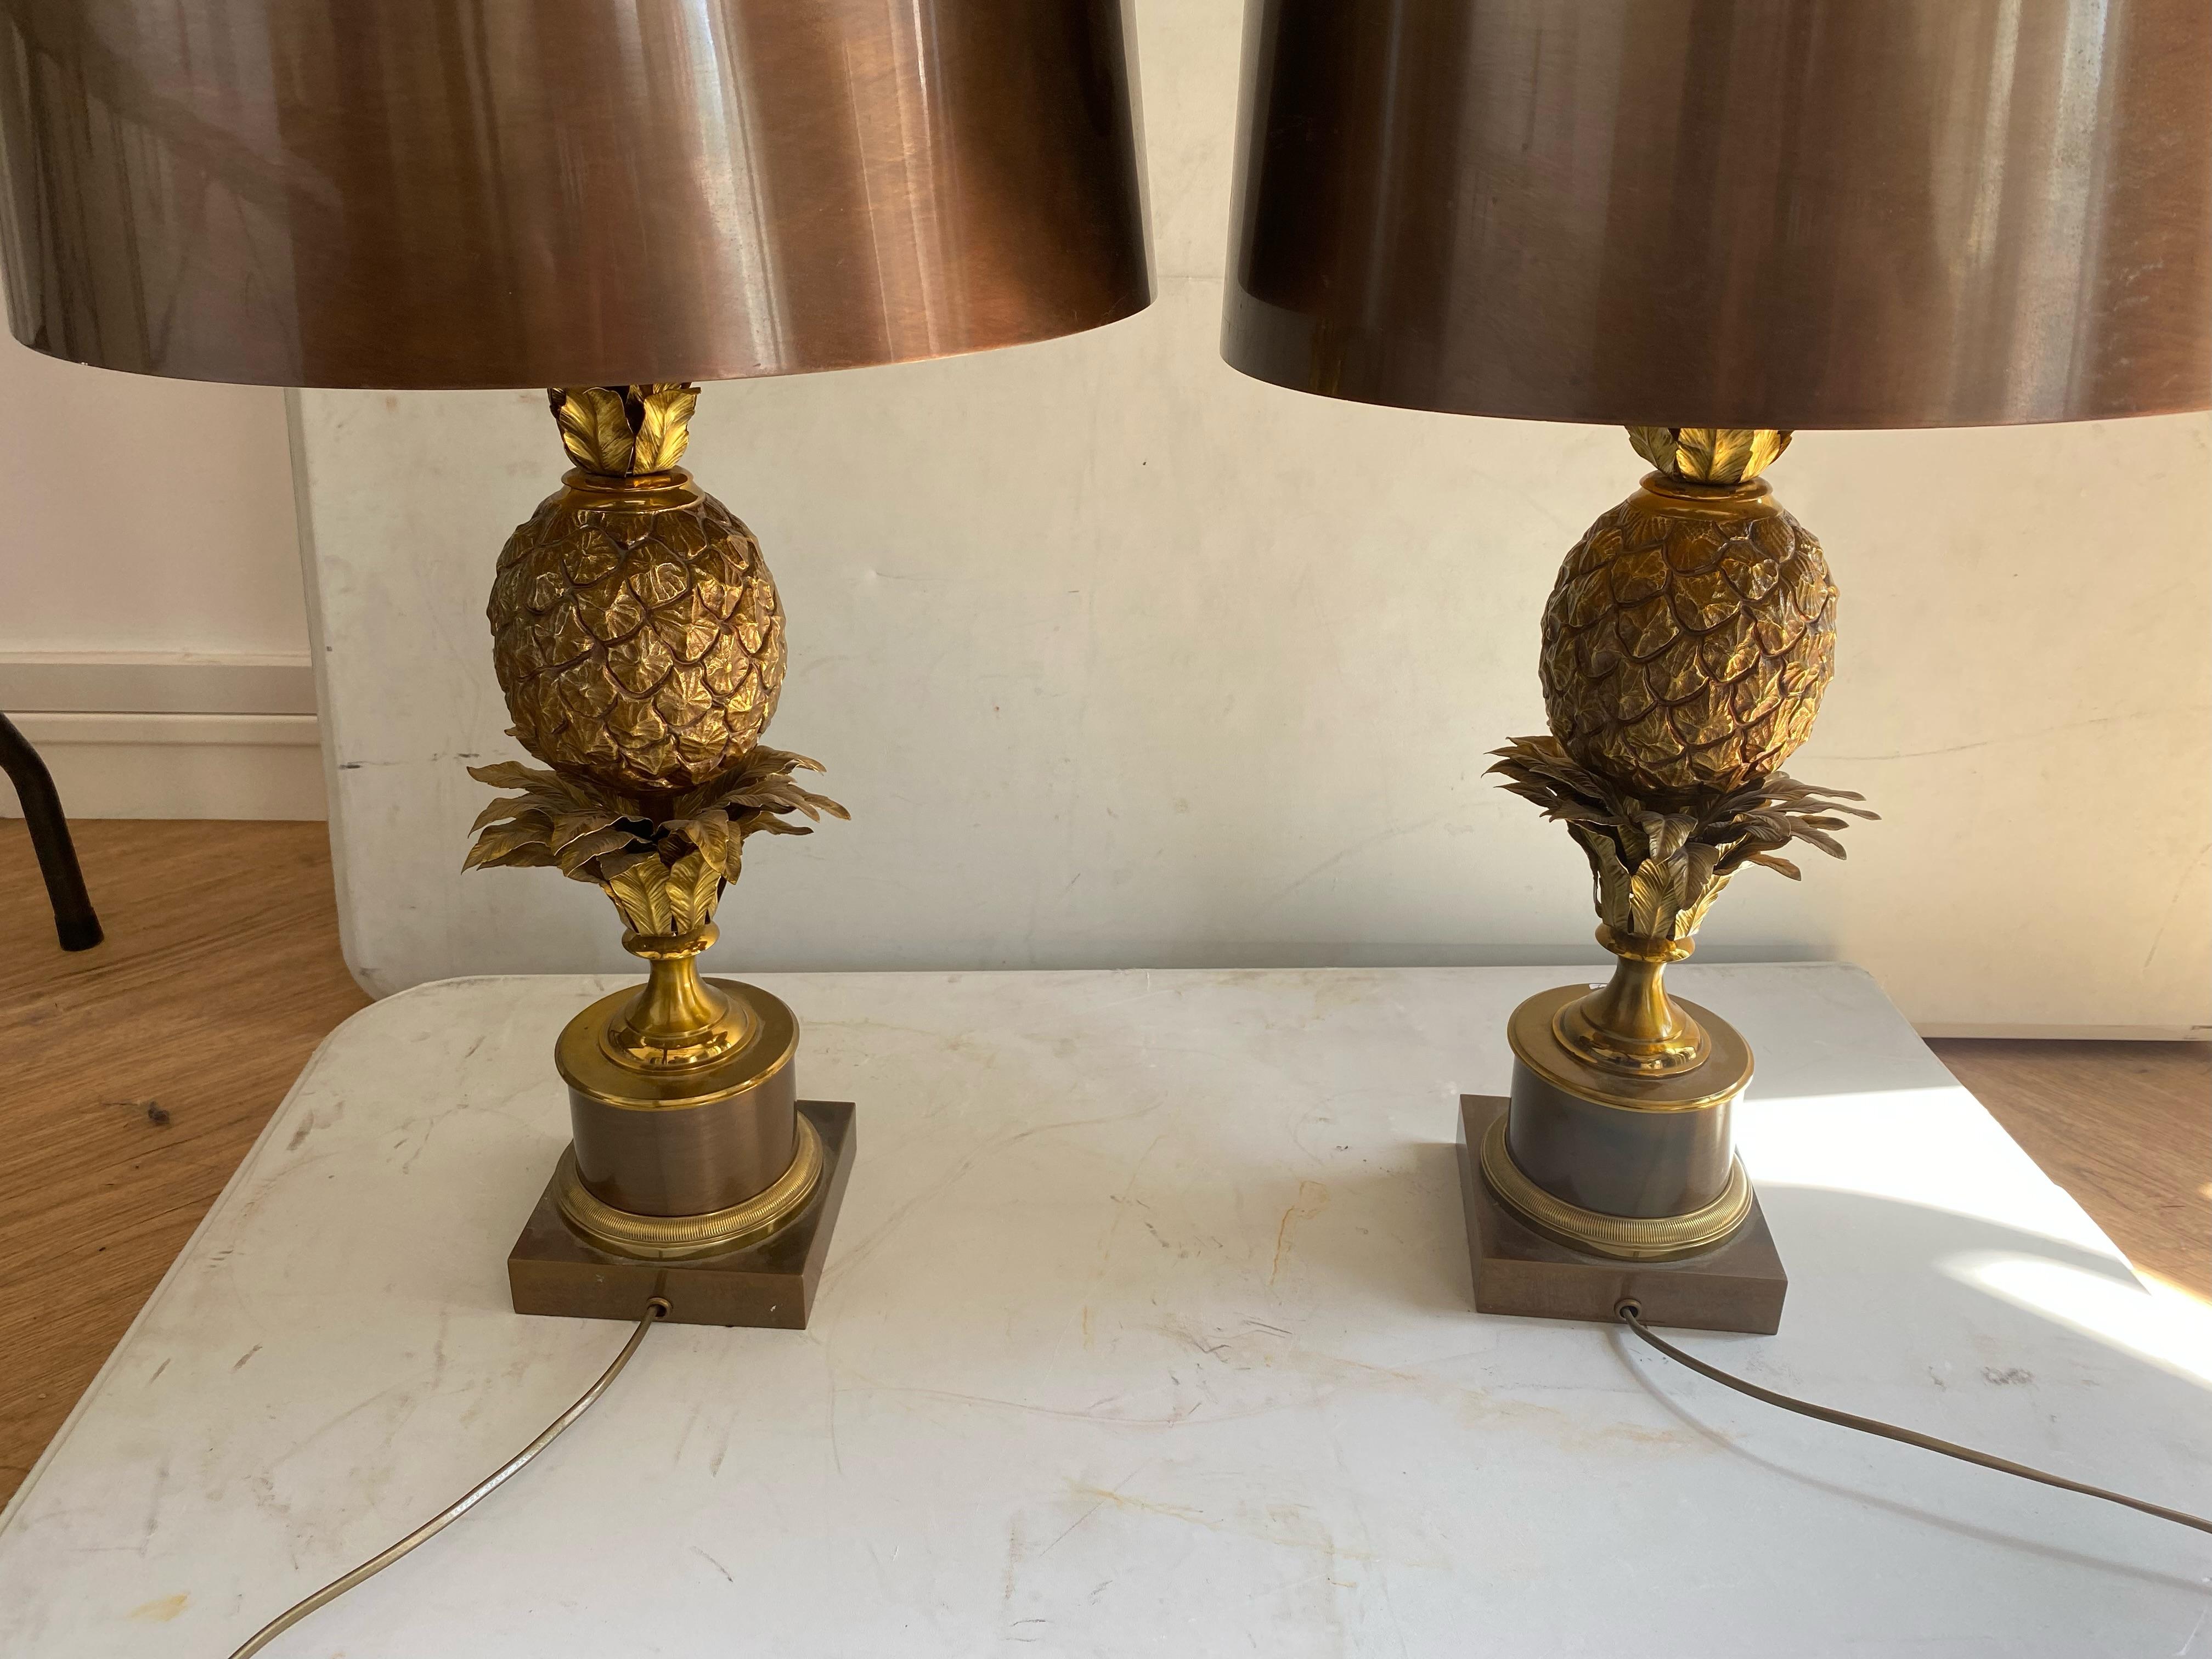 Pair of Pineapple Lamps signed Charles & Fils, made in France, bronze structure, shades in patinated brass with an anti-glare saucer, unique piece of order, good condition, Circa 1950/70
3 bulbs, screw sockets
Height: 74cm
Base: 13 x 13